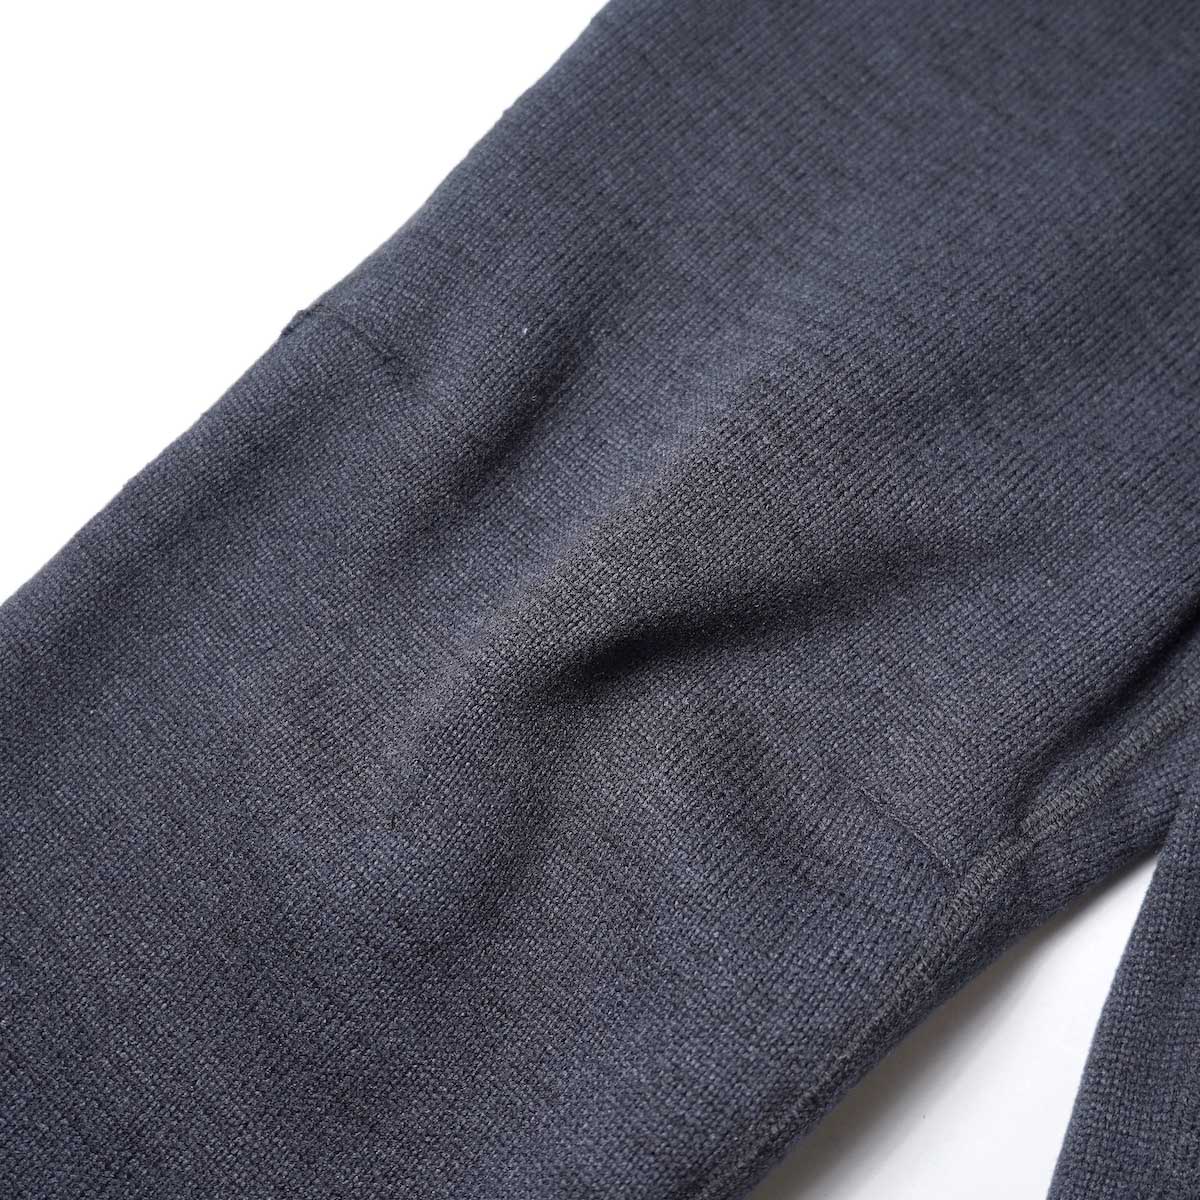 South2 West8 / 2P Cycle Pant - POLARTEC Fleece Lined Jersey (Black)膝